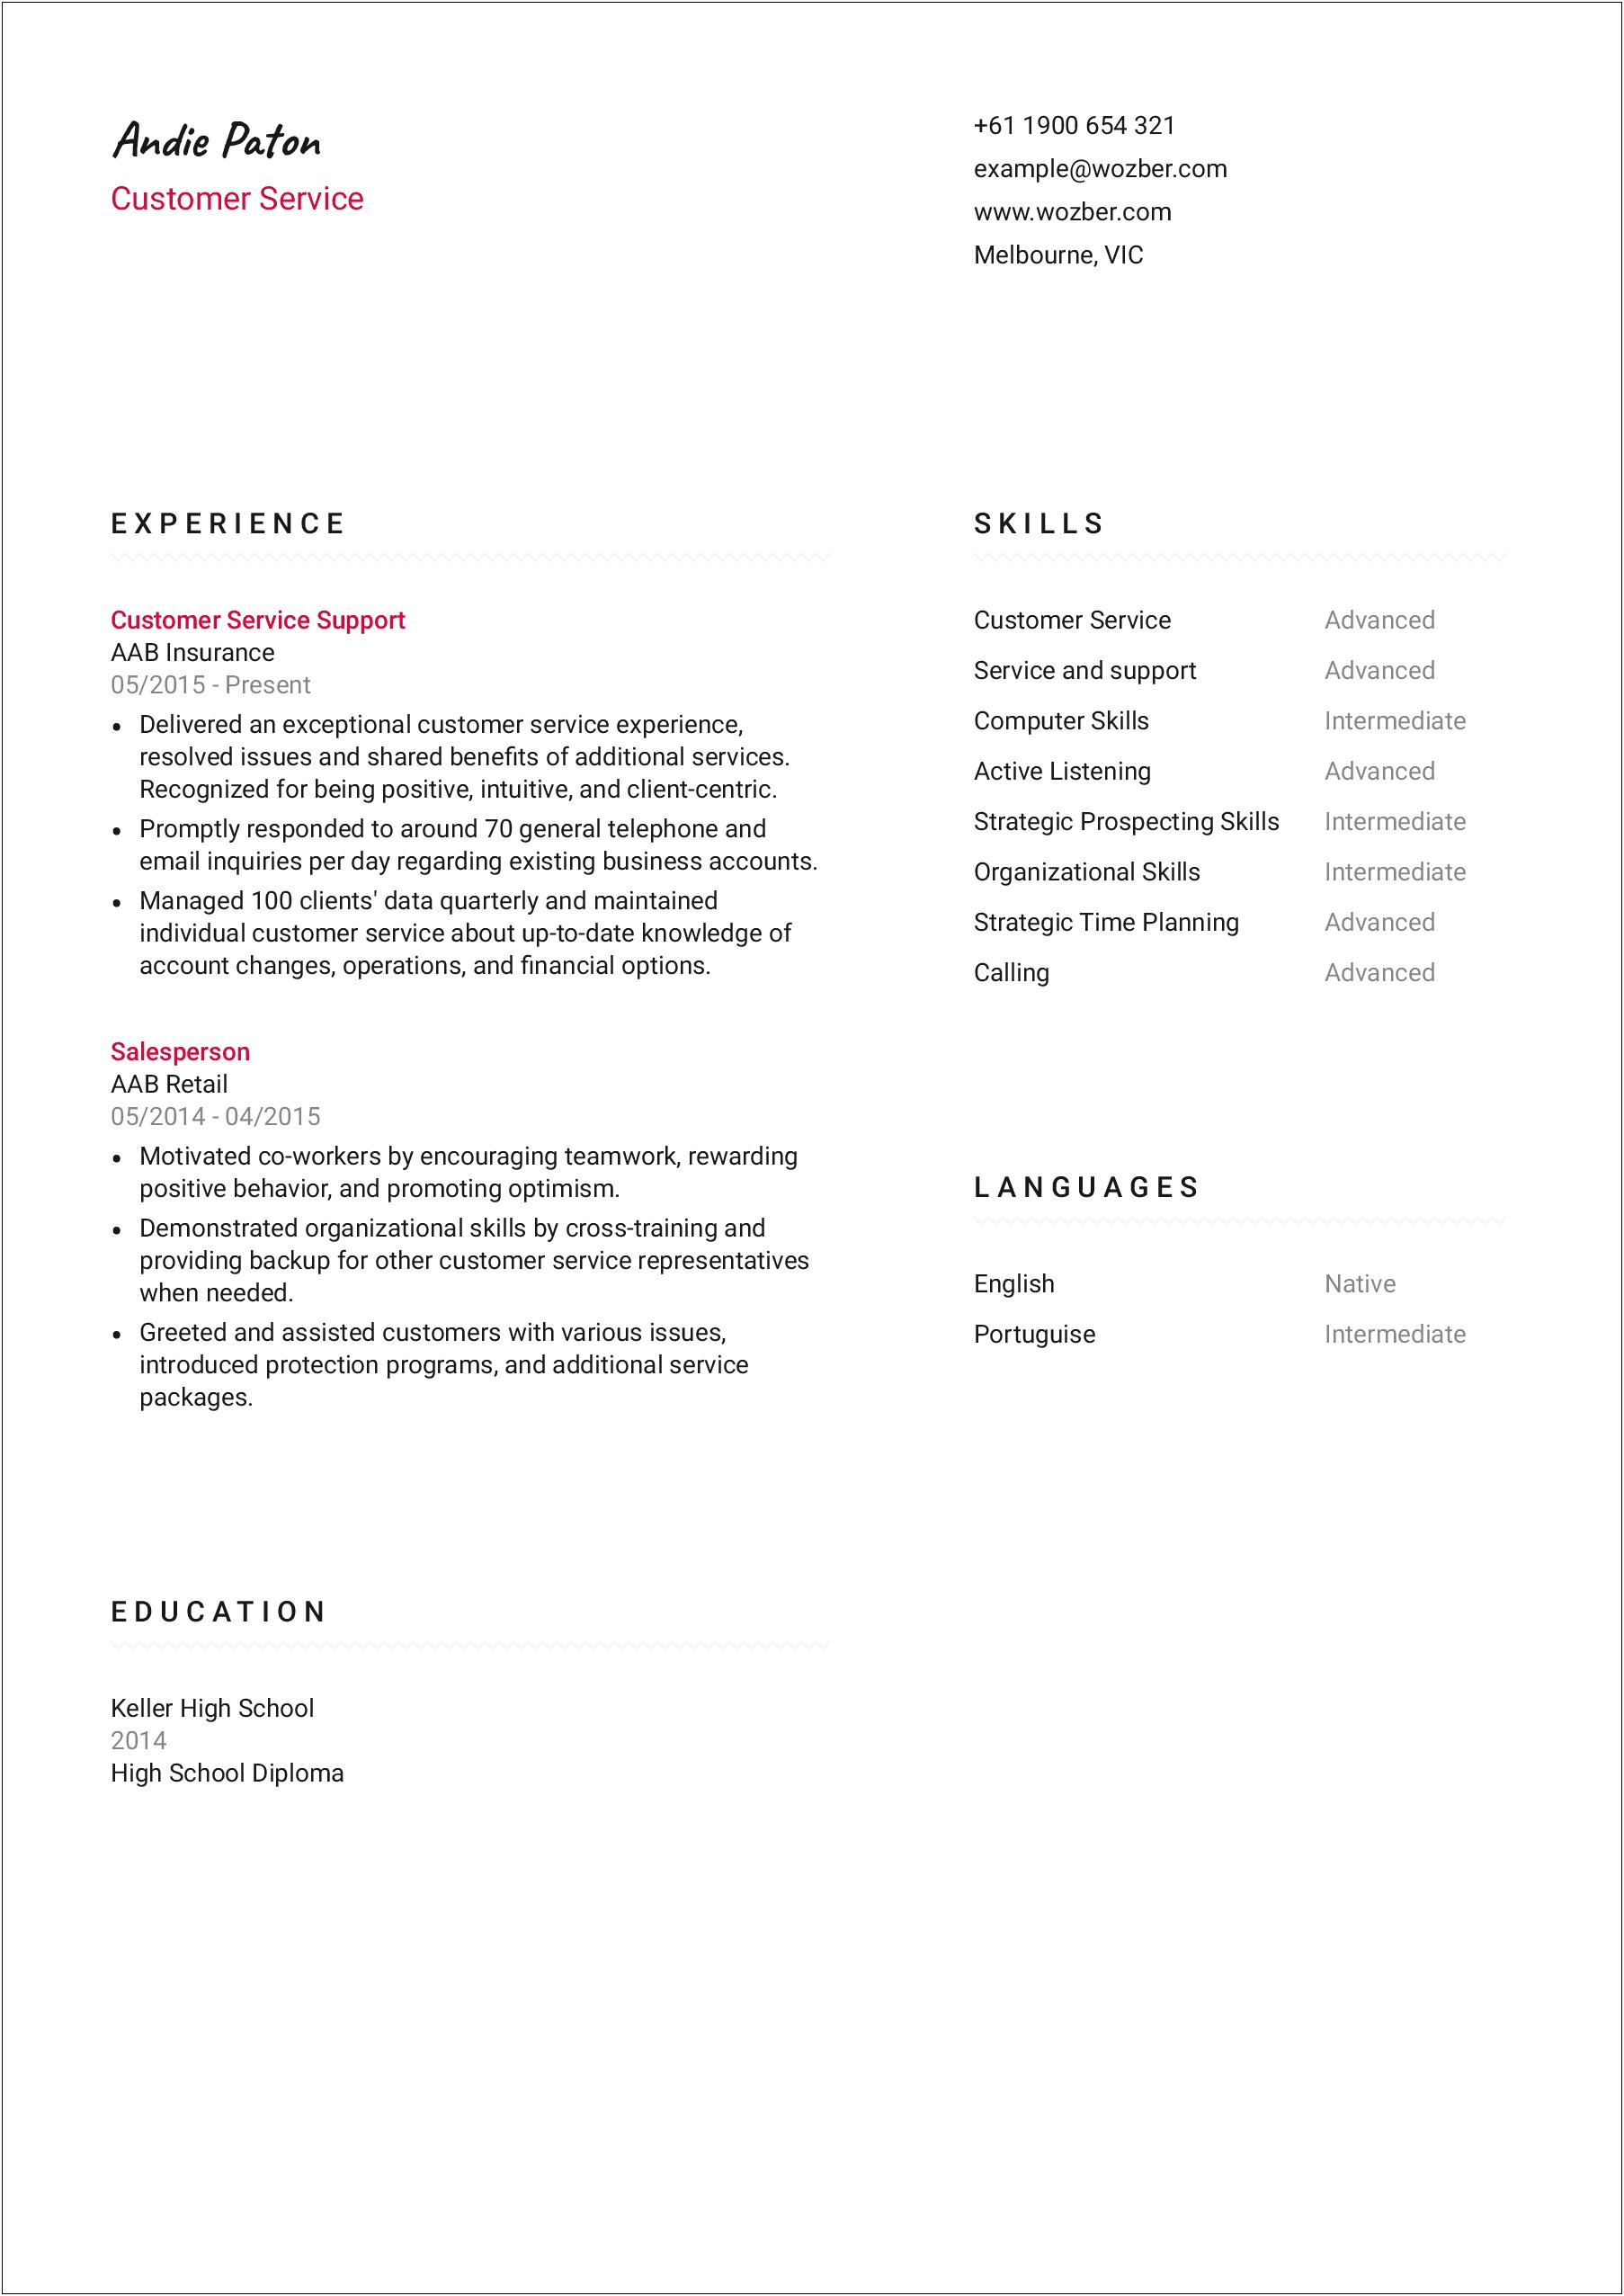 Customer Service Resume Examples 2015